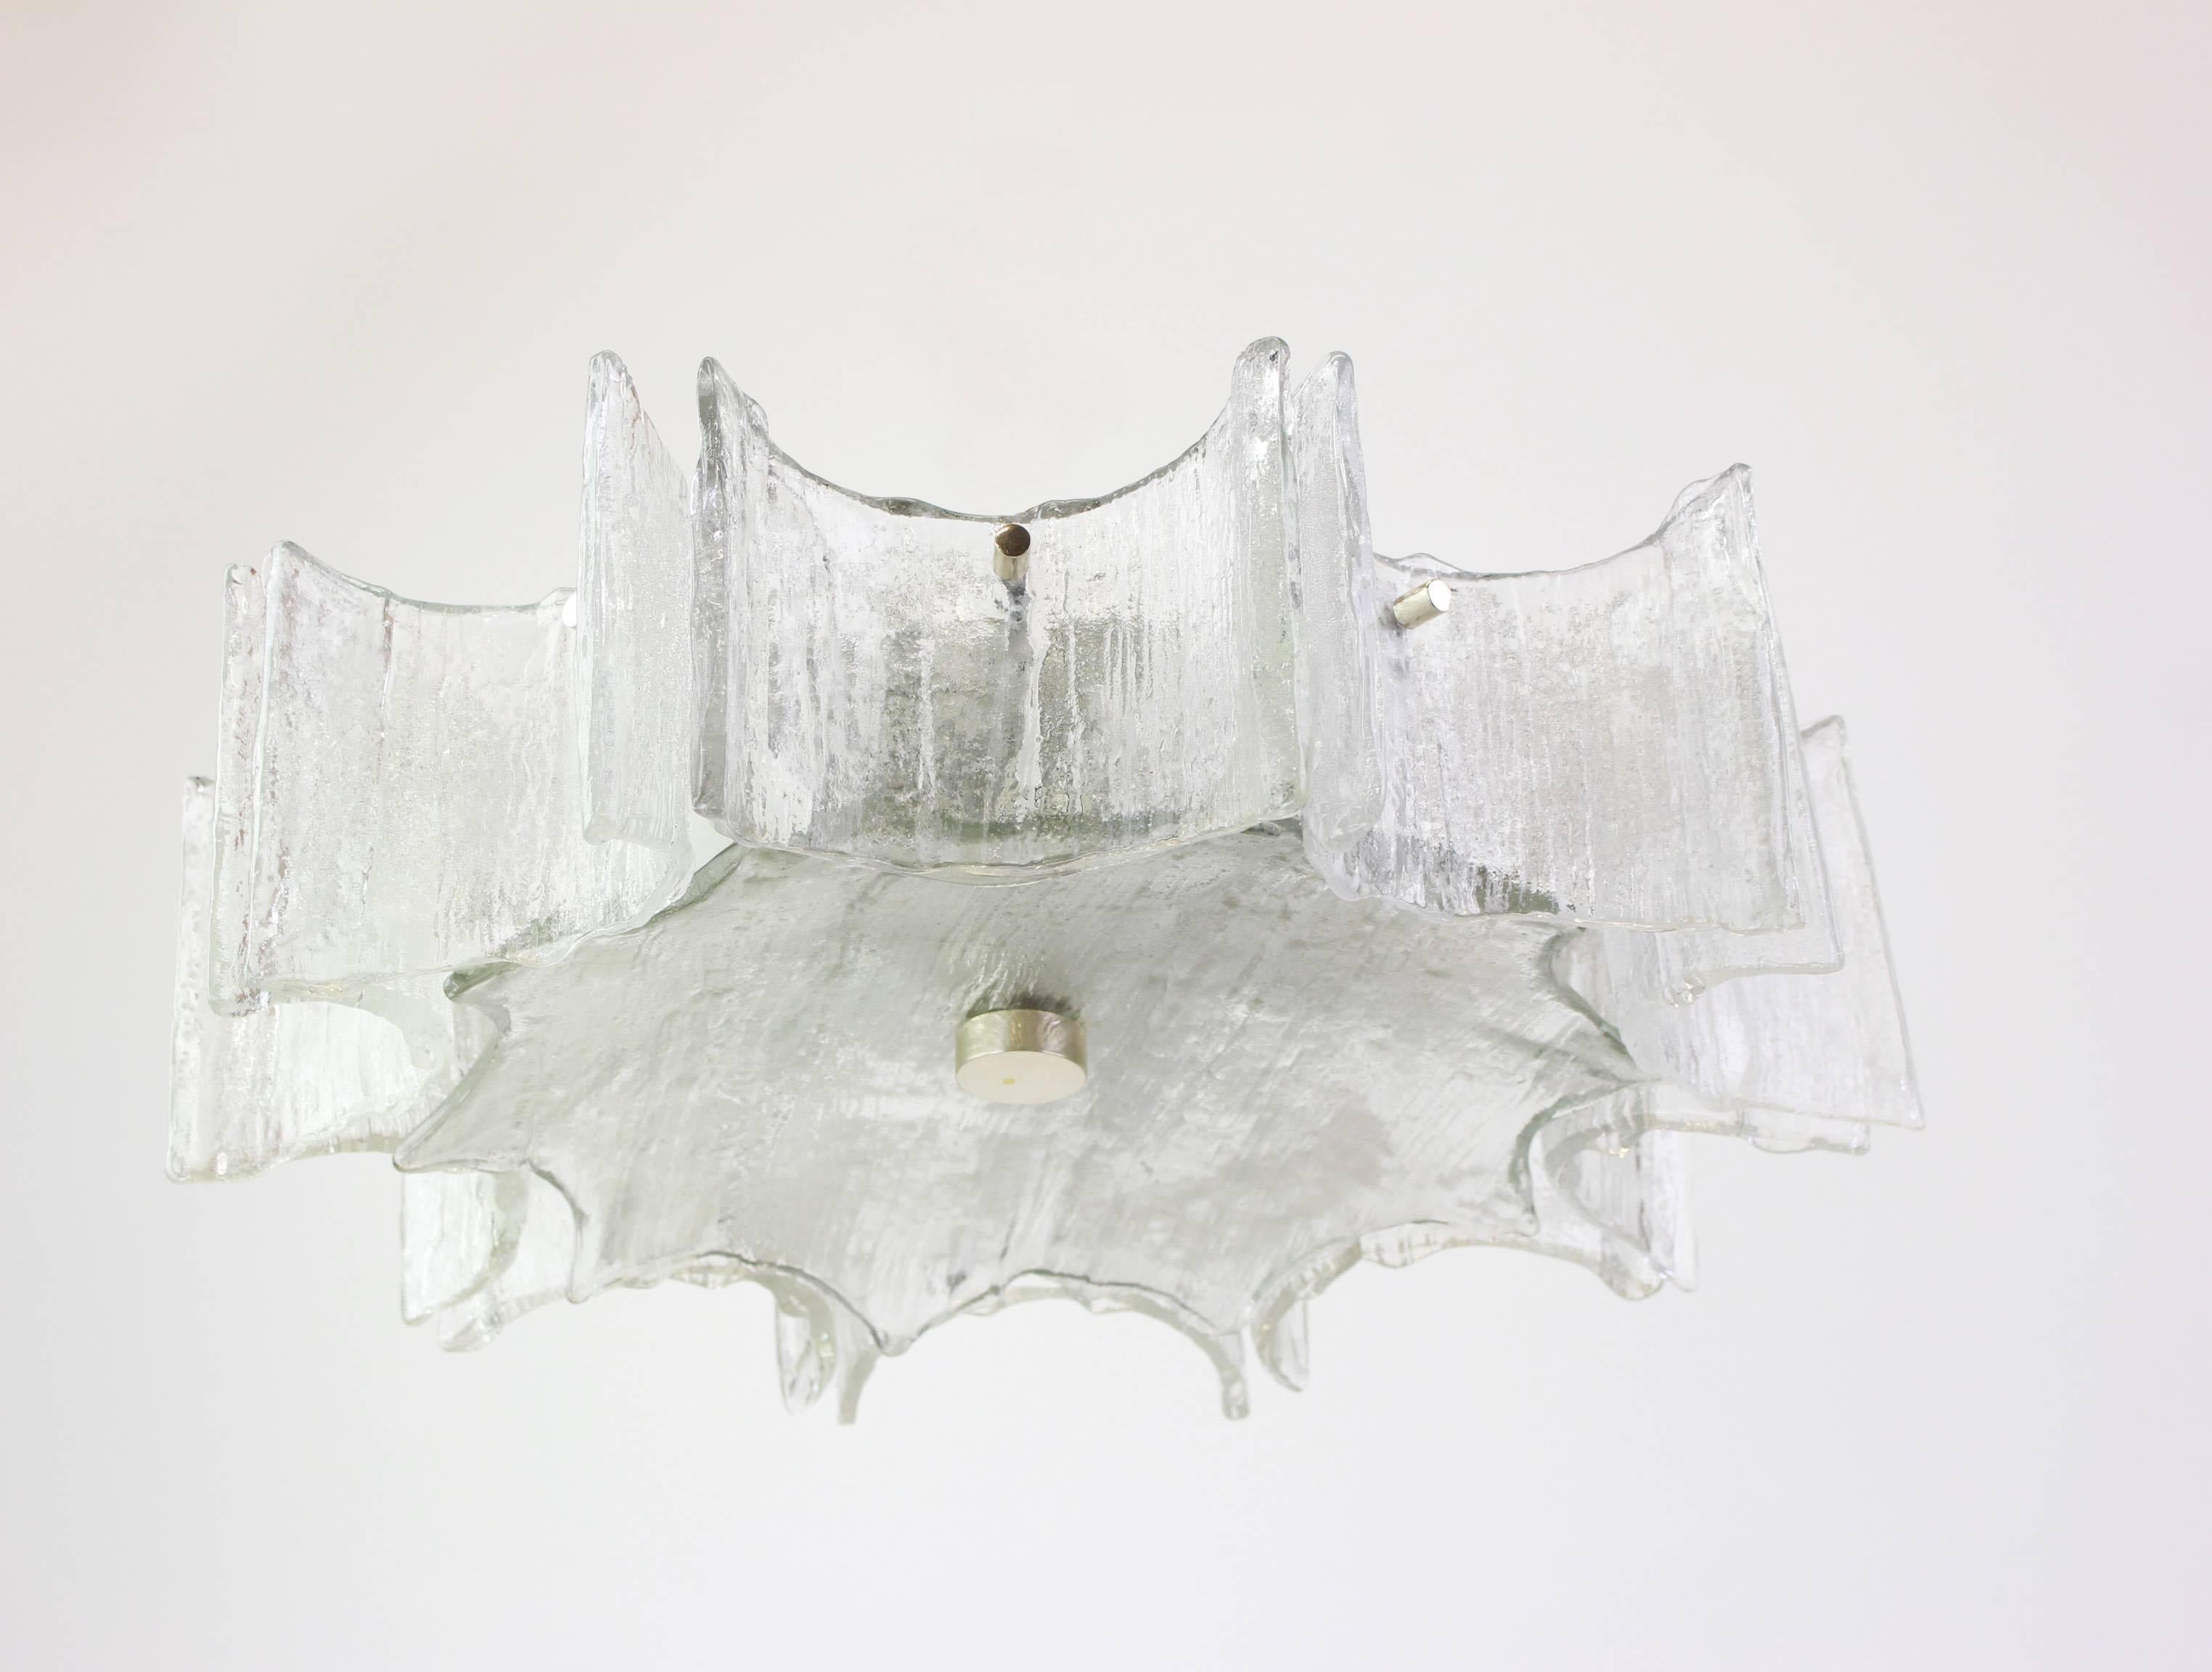 Fantastic star shape flush mount light by Kaiser, Germany, manufactured circa 1960-1969. Curved Murano glasses suspended from a fixture.

Sockets: Five x E14 candelabras bulbs (max. 40 watts each).
Light bulbs are not included. It is possible to